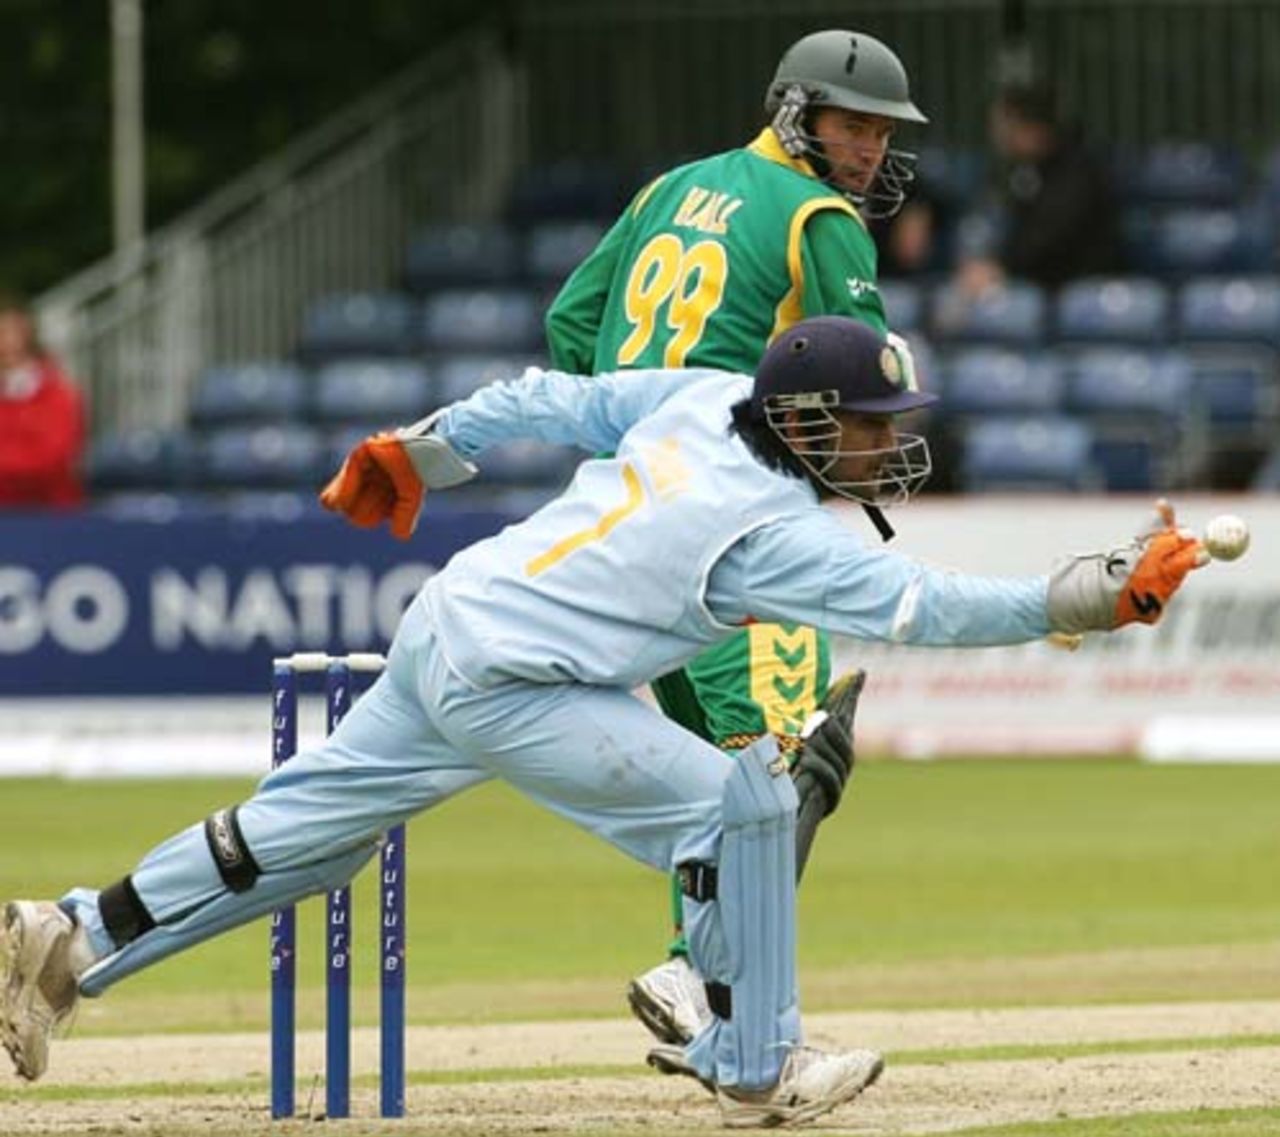 MS Dhoni reaches for the ball as Andrew Hall looks on, India v South Africa, 2nd ODI, Belfast, June 29, 2007